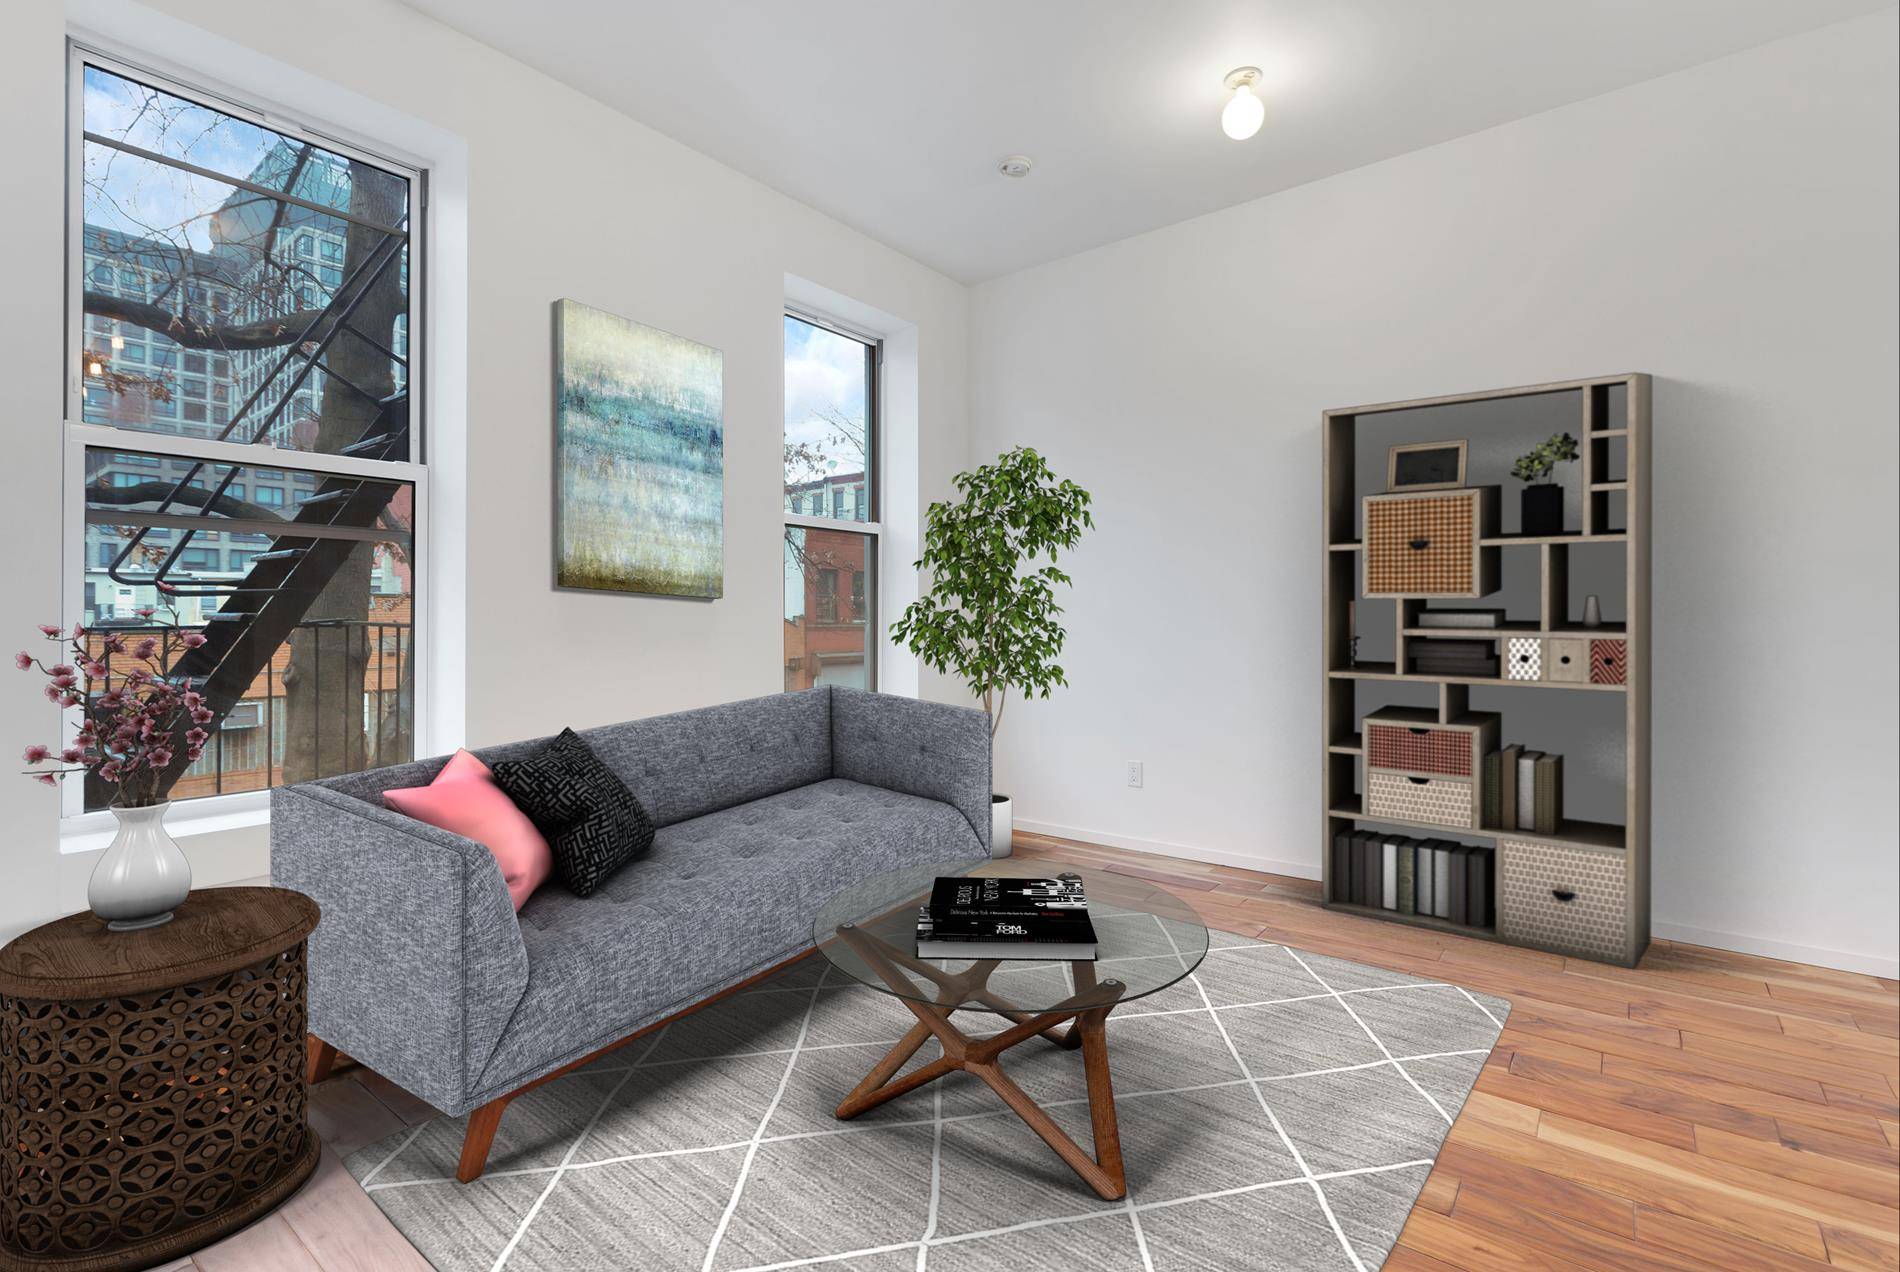 Immaculate and bright Architect designed alcove studio with separate sleeping area located on a tree lined street in the heart of Prospect Heights and close to everything this vibrant neighborhood ...